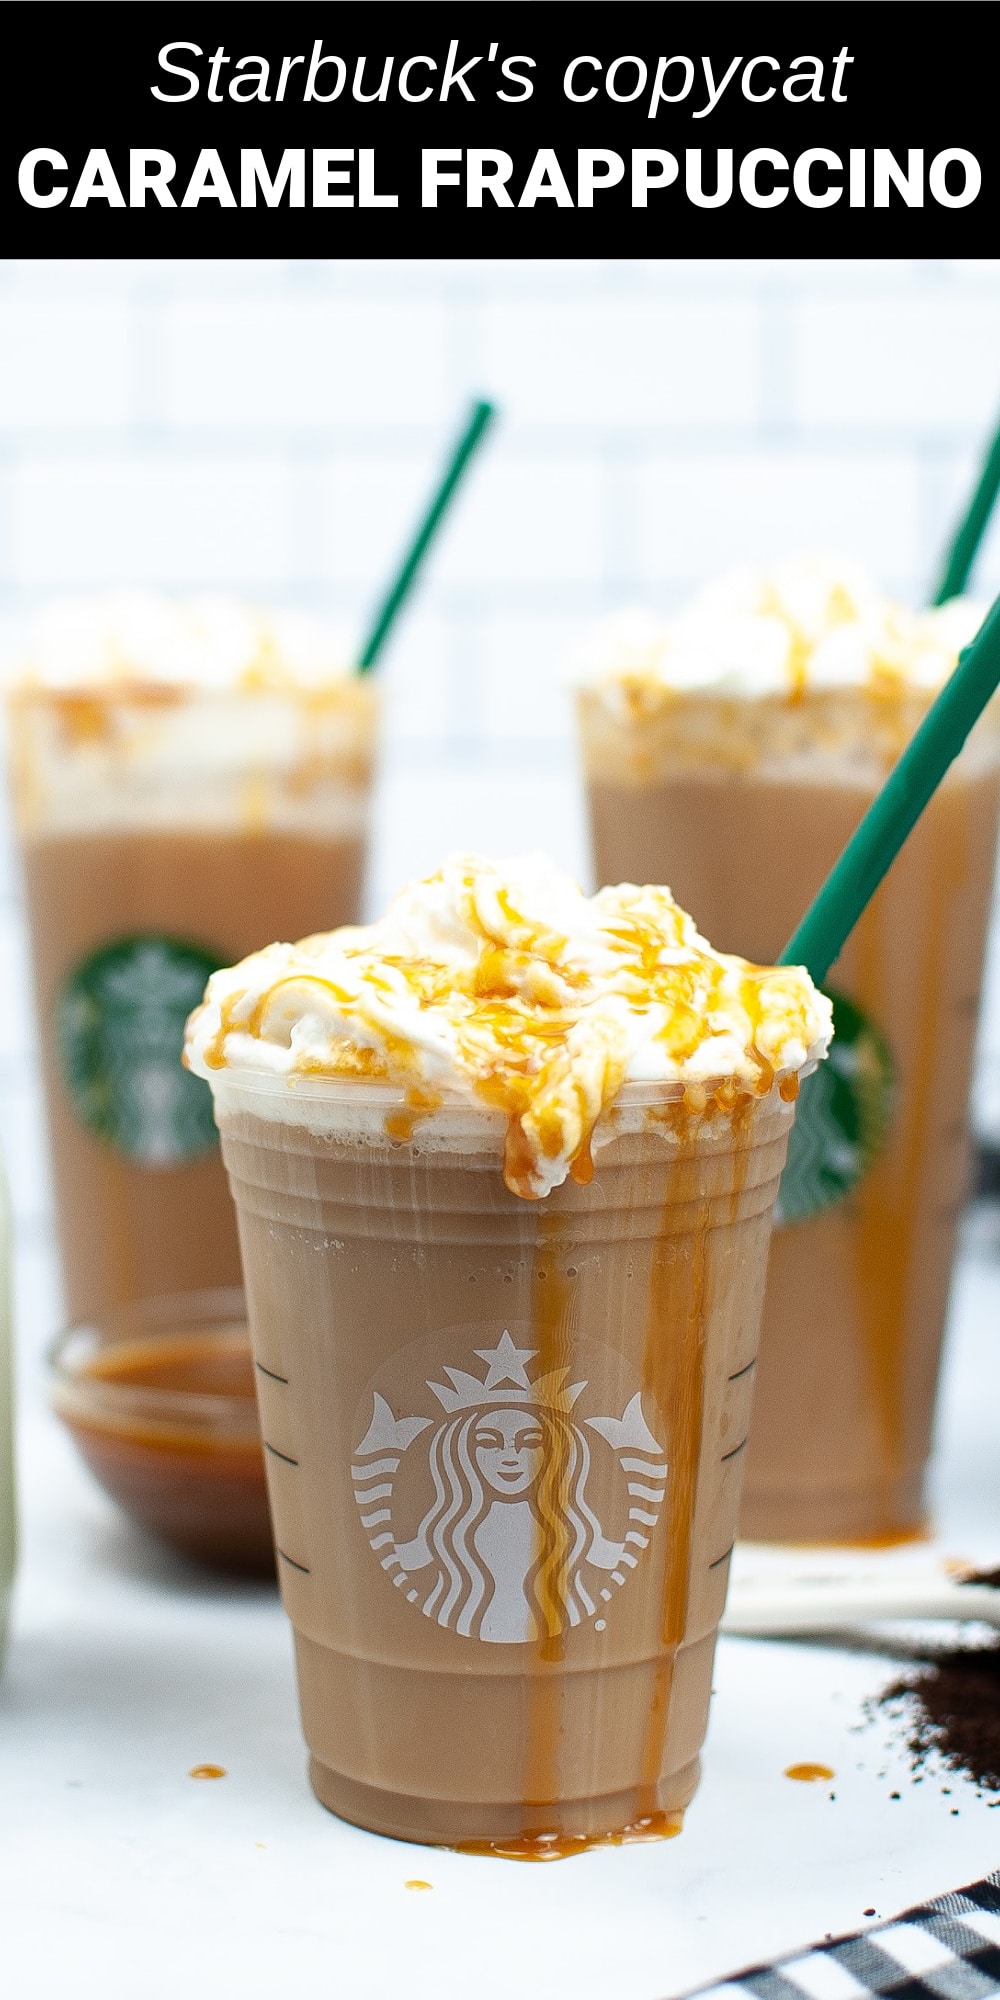 Skip the drive-thru and make this Copycat Starbucks Caramel Frappuccino recipe right in your own kitchen! Made with just a few simple ingredients, this frosty and luxurious treat tastes just as delicious as the original at a fraction of the cost. 